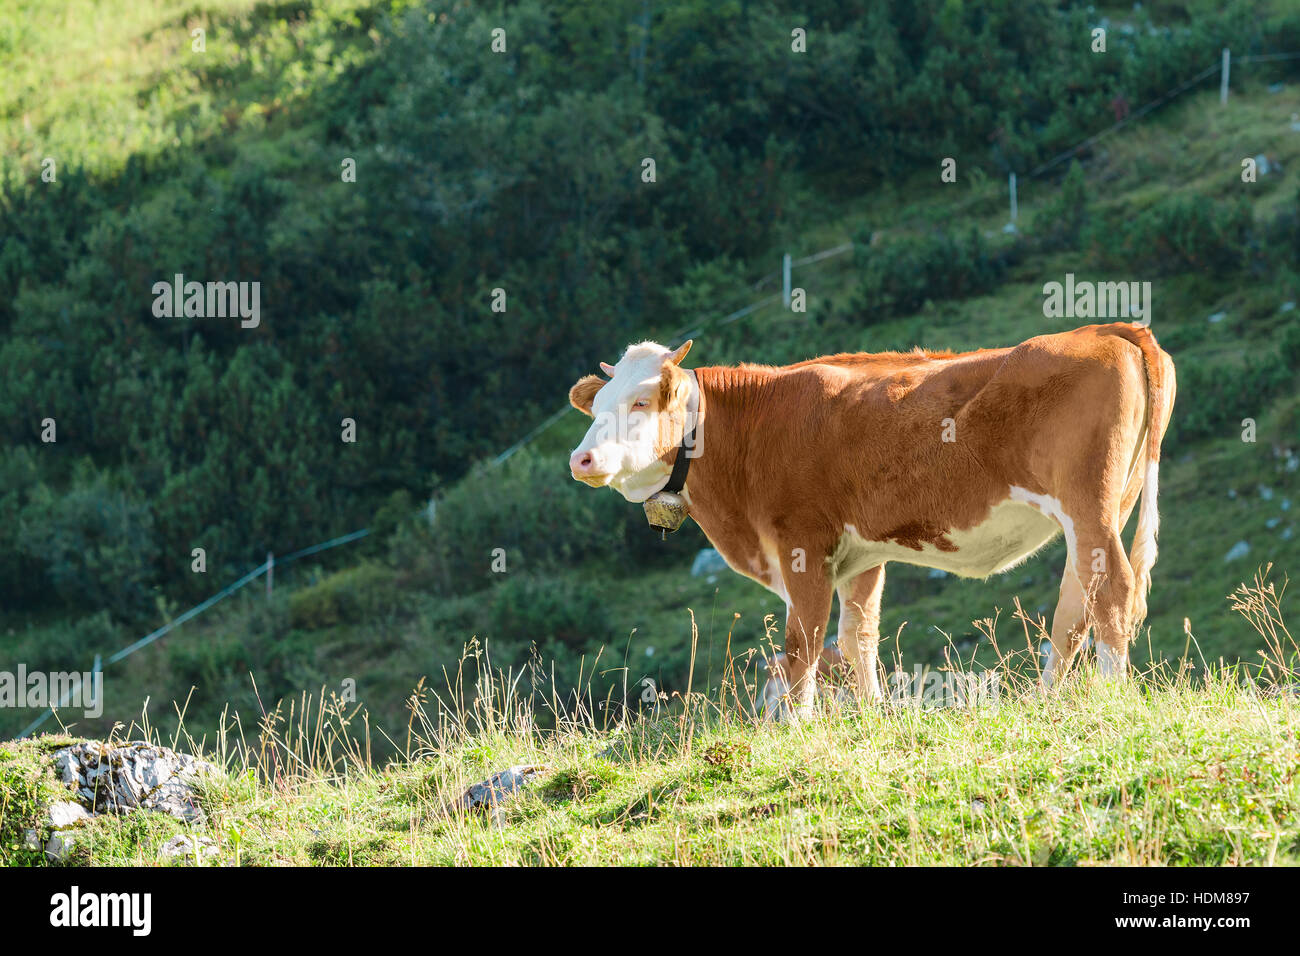 Highlands Alpine pasture with fresh grass and Hereford breed grazing cow. Stock photo captured at Alps mountain in summer sunny day. Stock Photo